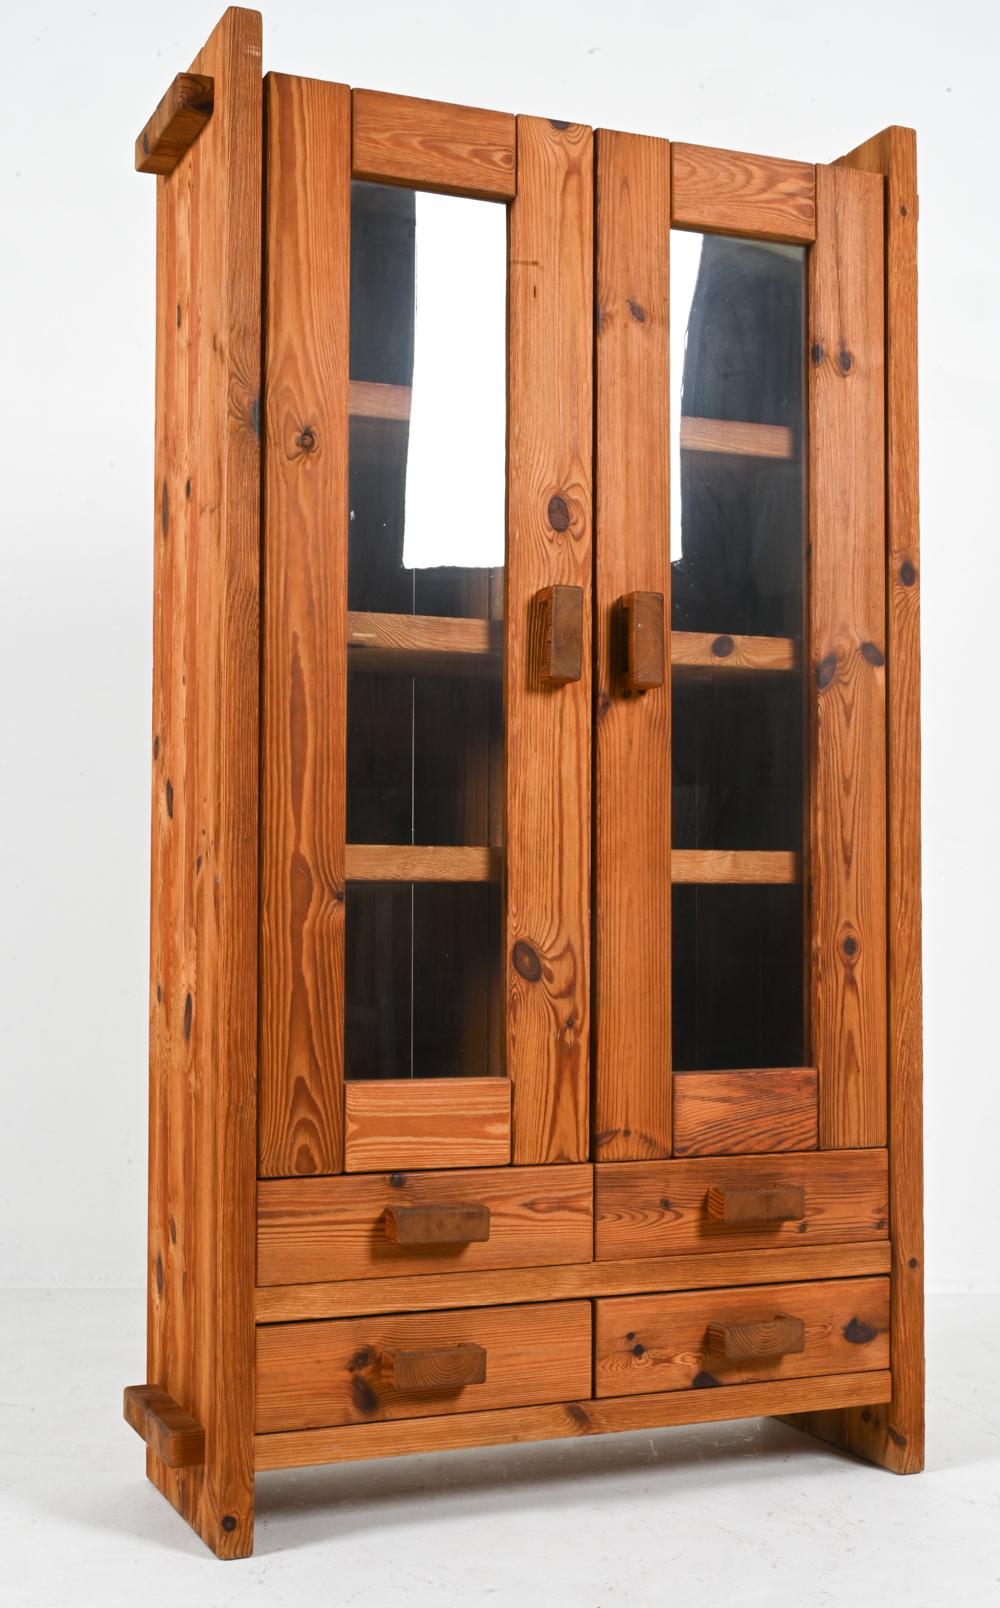 Bring rustic Postmodern charm to your home with this fabulous glazed cabinet from the sought-after 